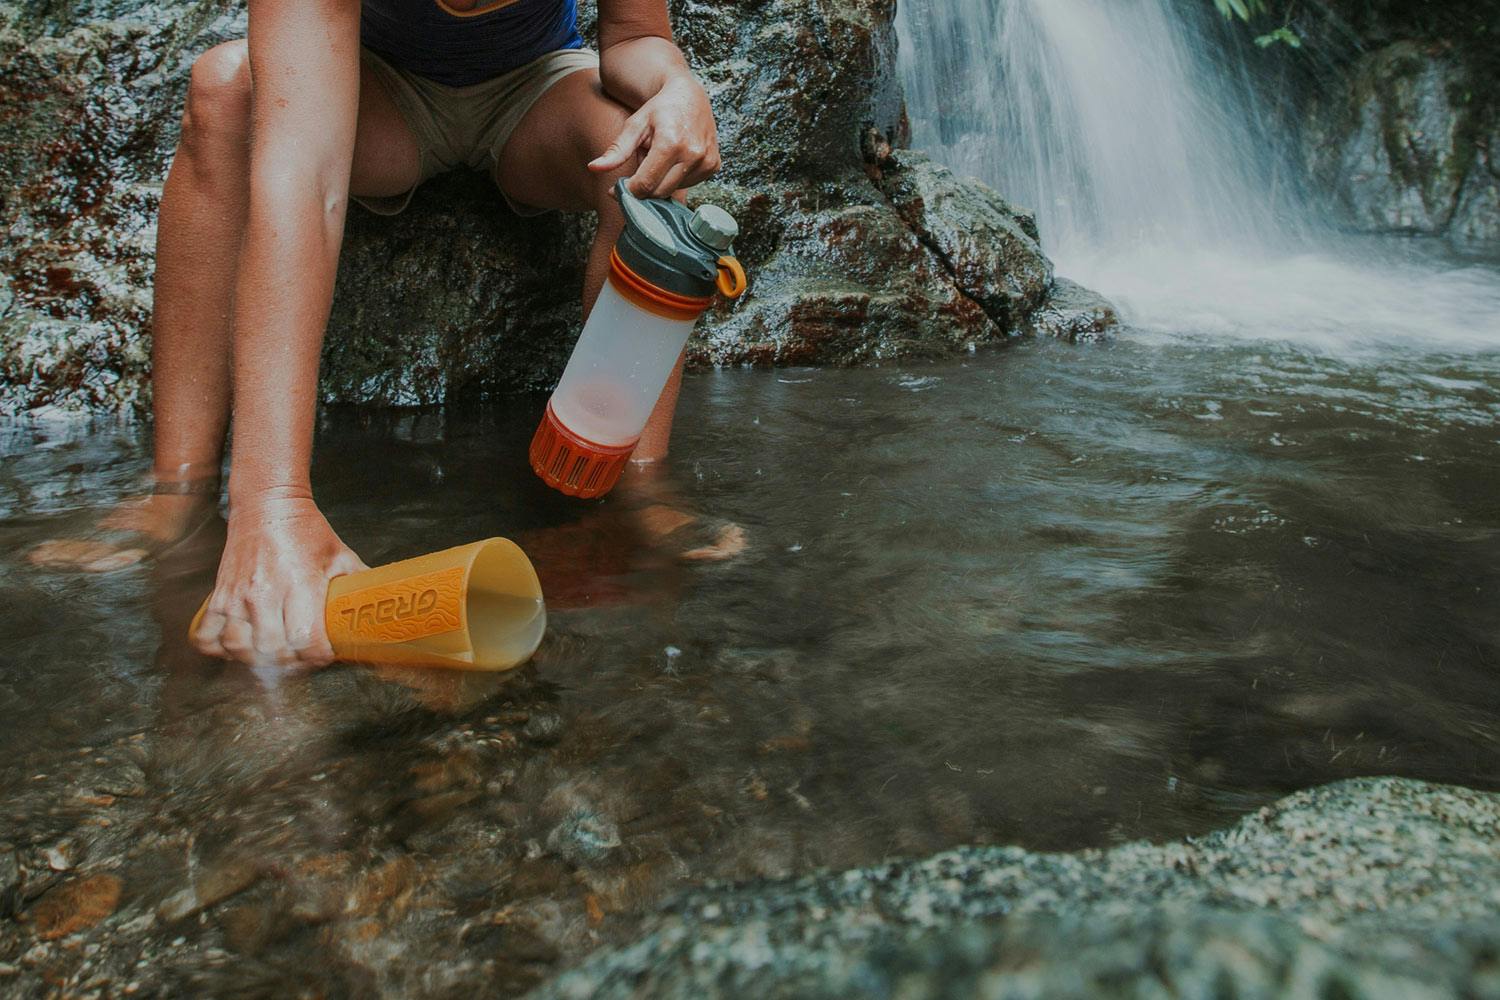 A person sits near a waterfall scooping water into a portable water filtering bottle.